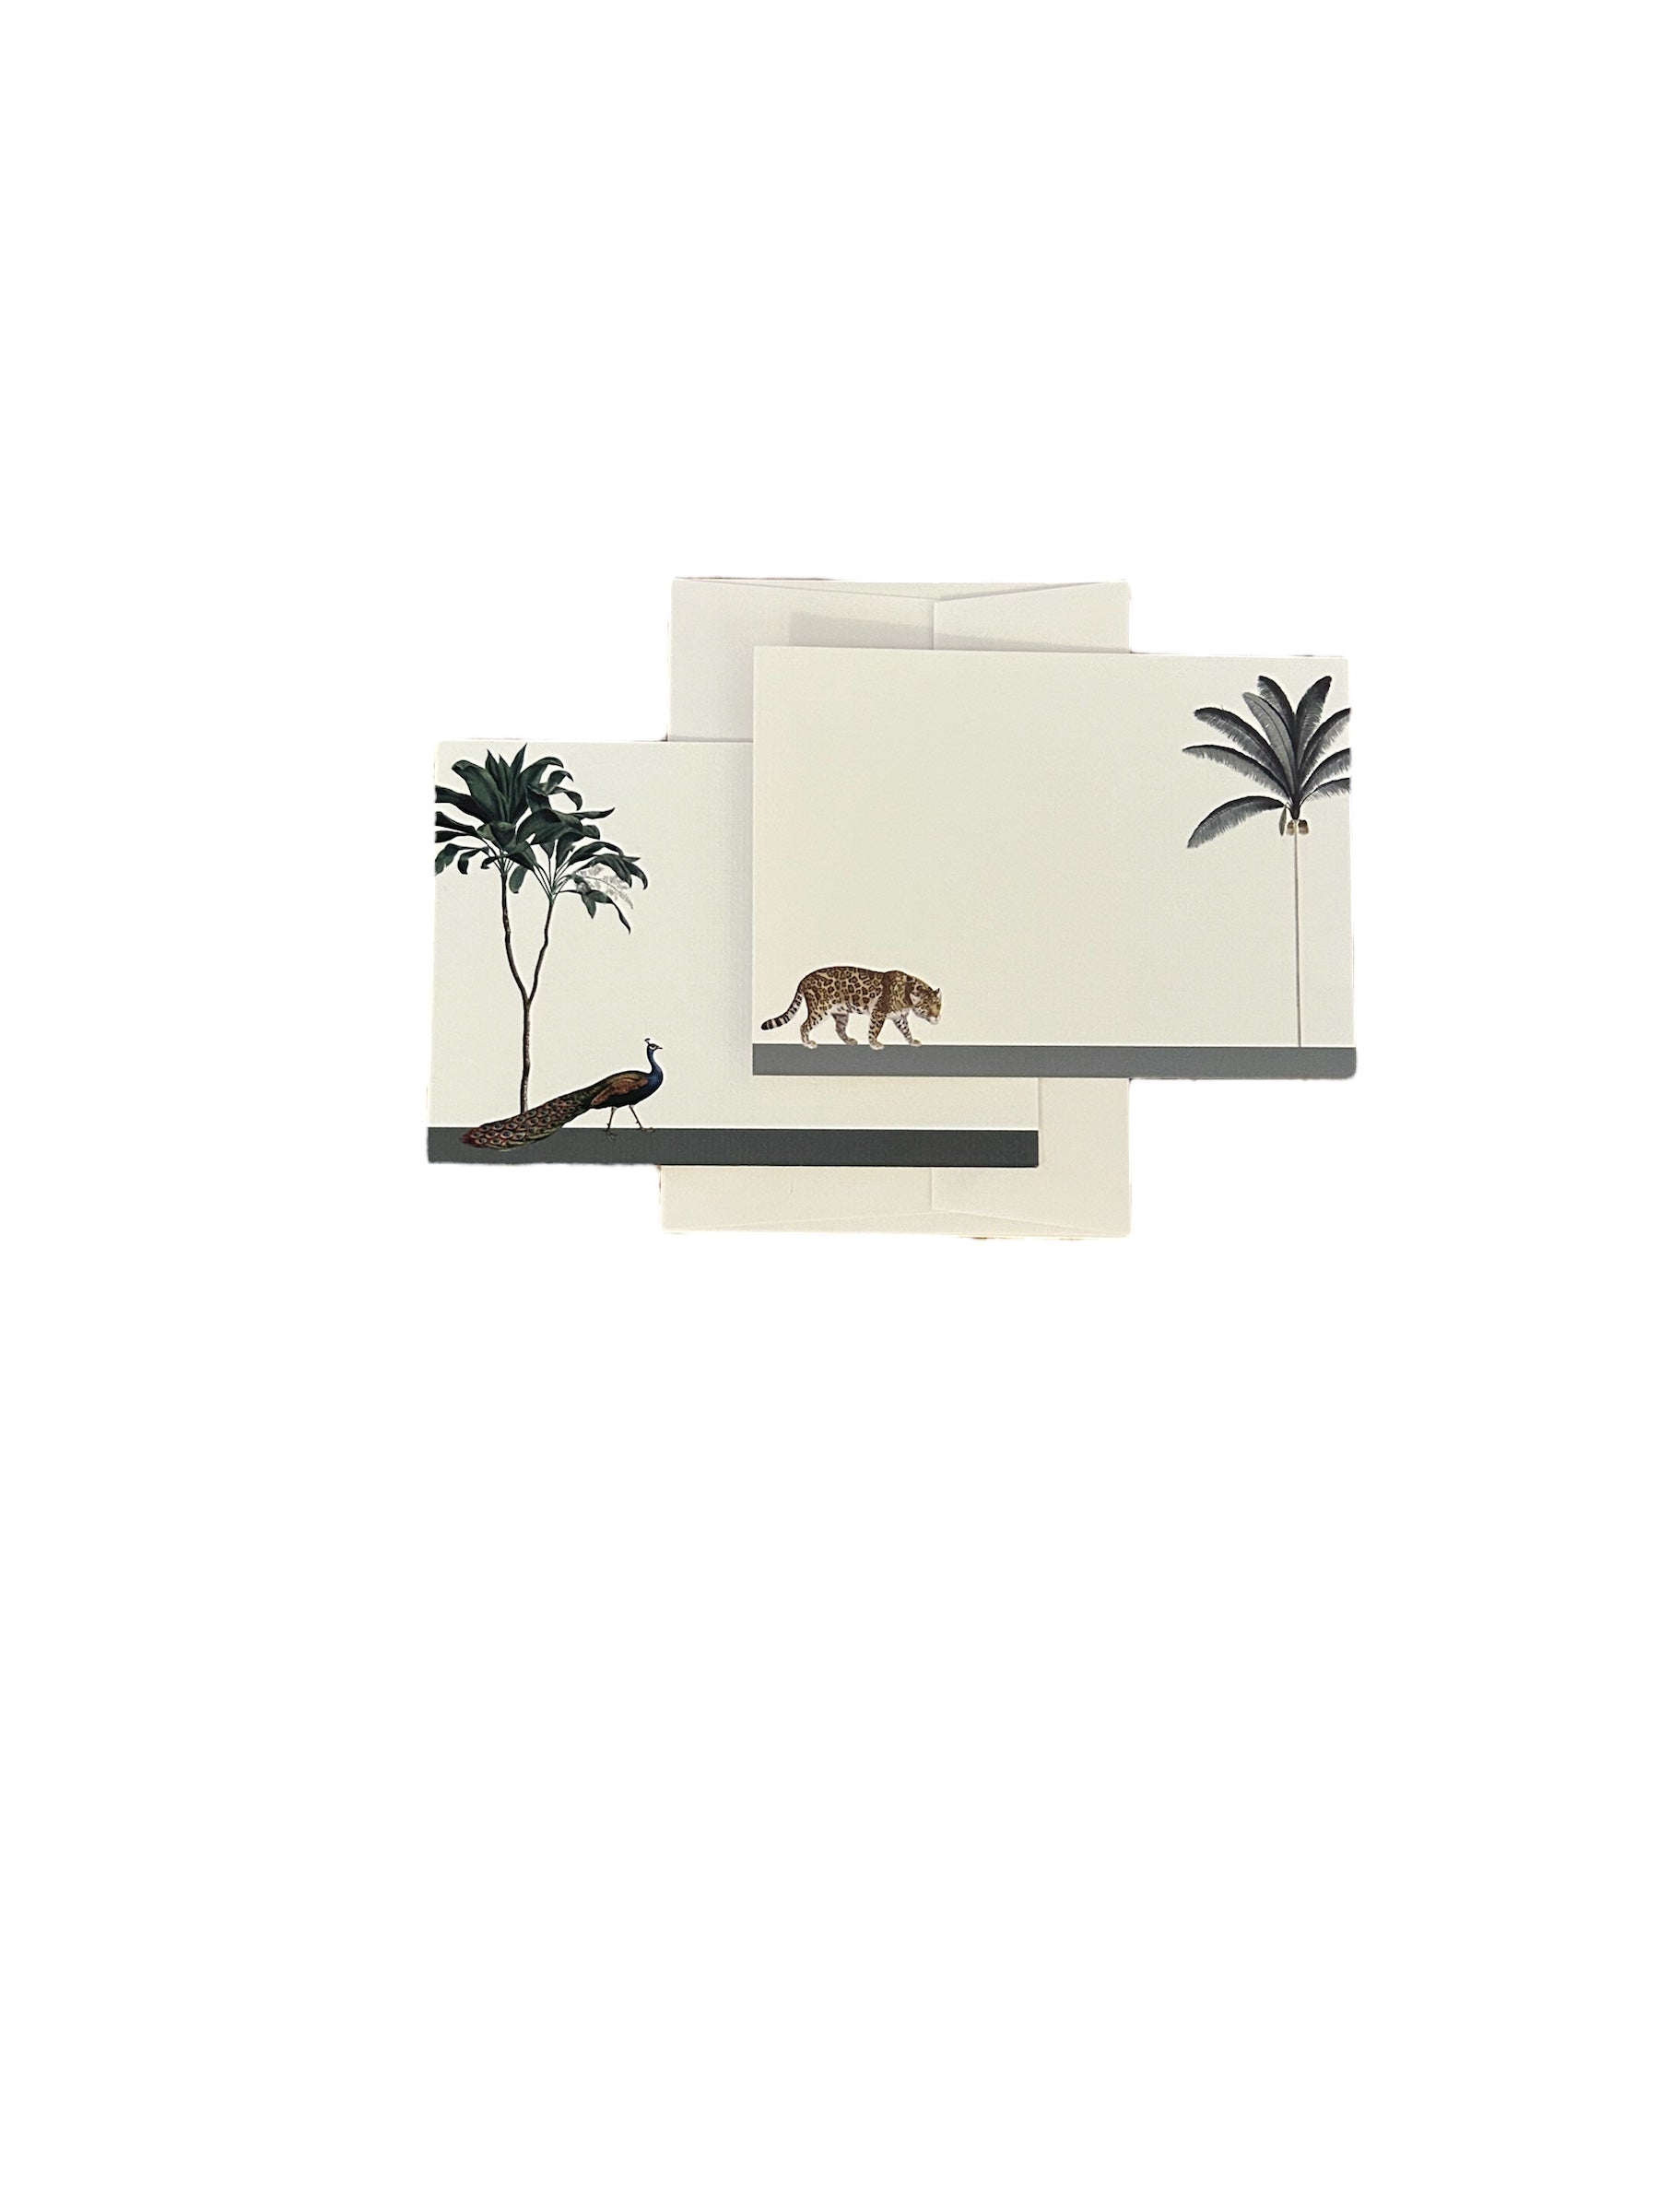 Darwin's Menagerie "Strutting Peacock Prowling Leopard" Notecard Set with Laid Envelopes